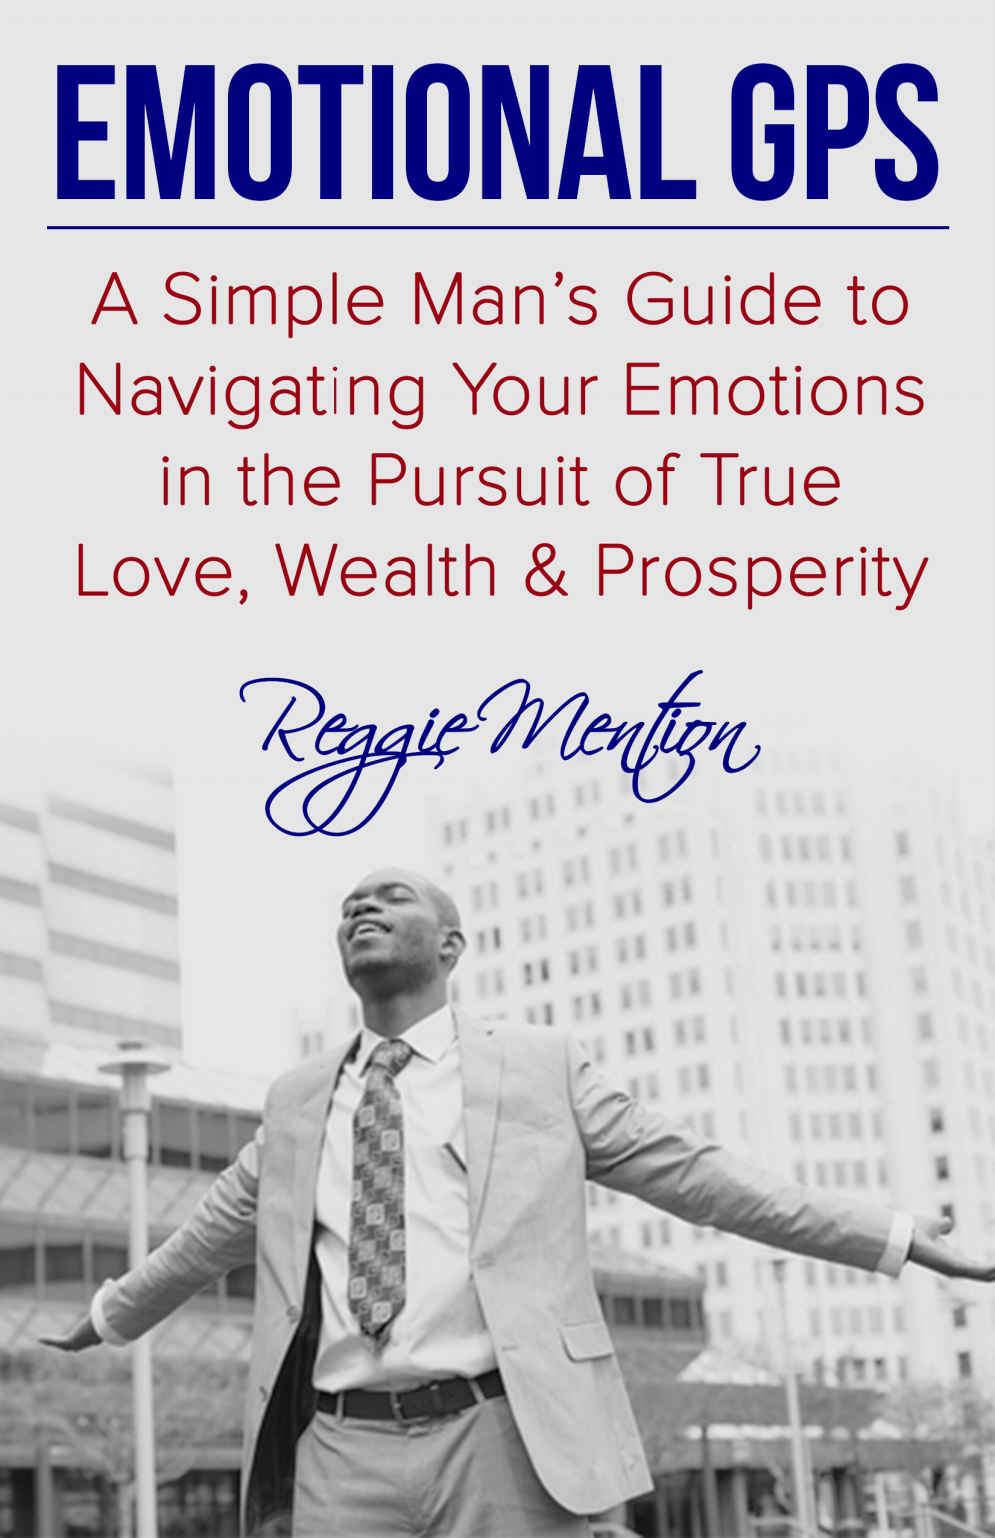 FREE: Emotional GPS: A Simple Man’s Guide to Navigating Your Emotions in the Pursuit of True Love, Wealth & Prosperity by Reggie Mention